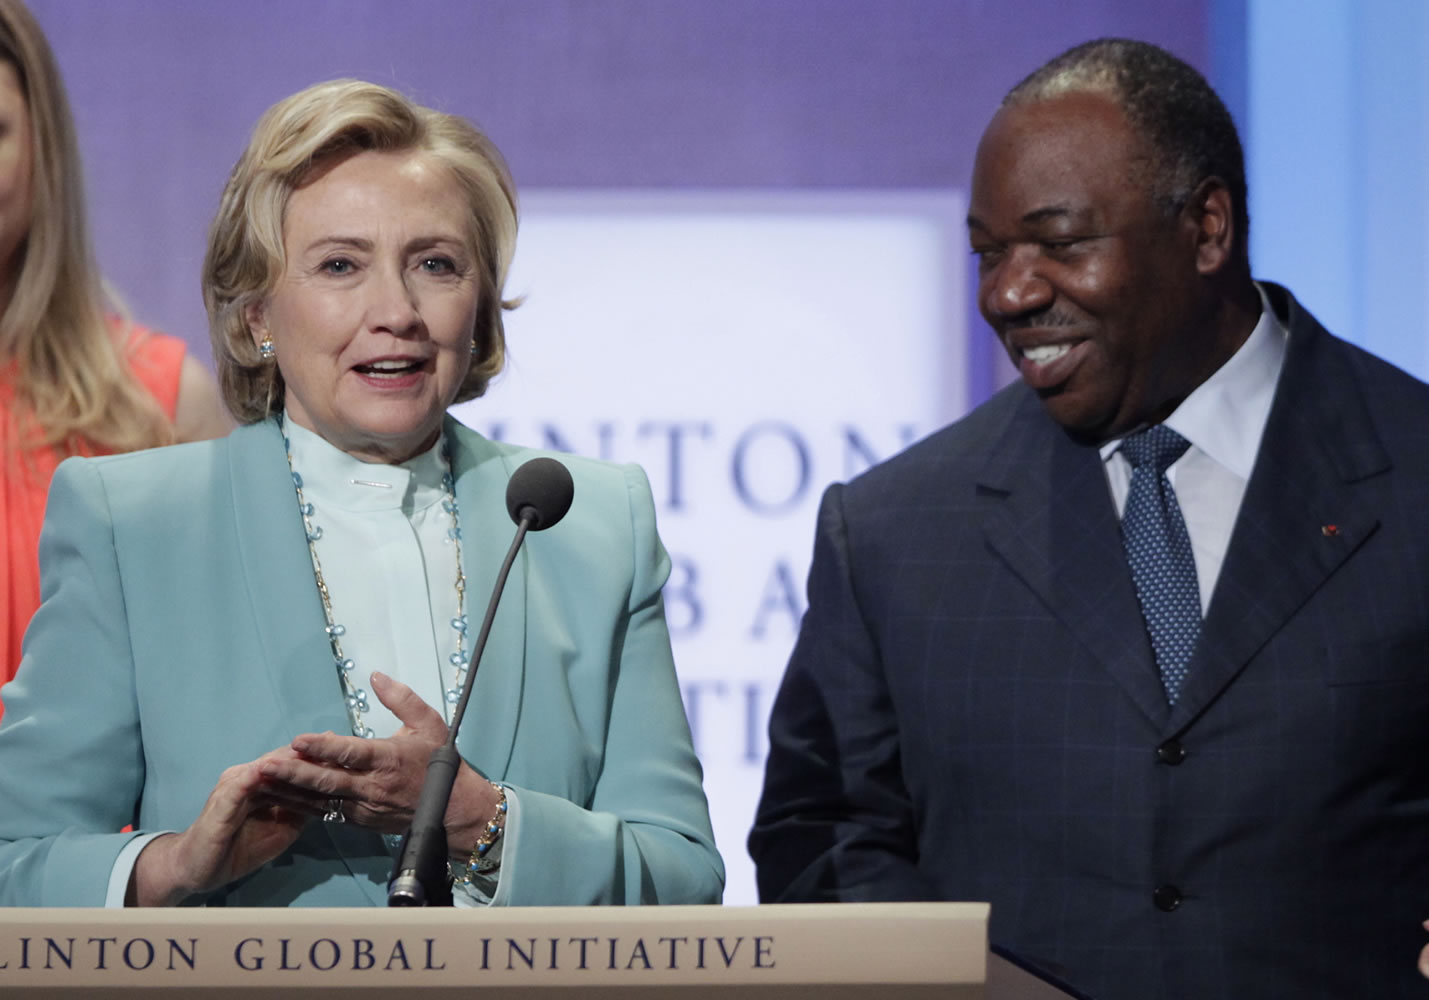 Former Secretary of State Hillary Rodham Clinton, left, is joined by Ali Bongo Ondimba, president of Gabon, at the Clinton Global Initiative, after announcing the Partnership to Save Africa's Elephants on Thursday in New York.